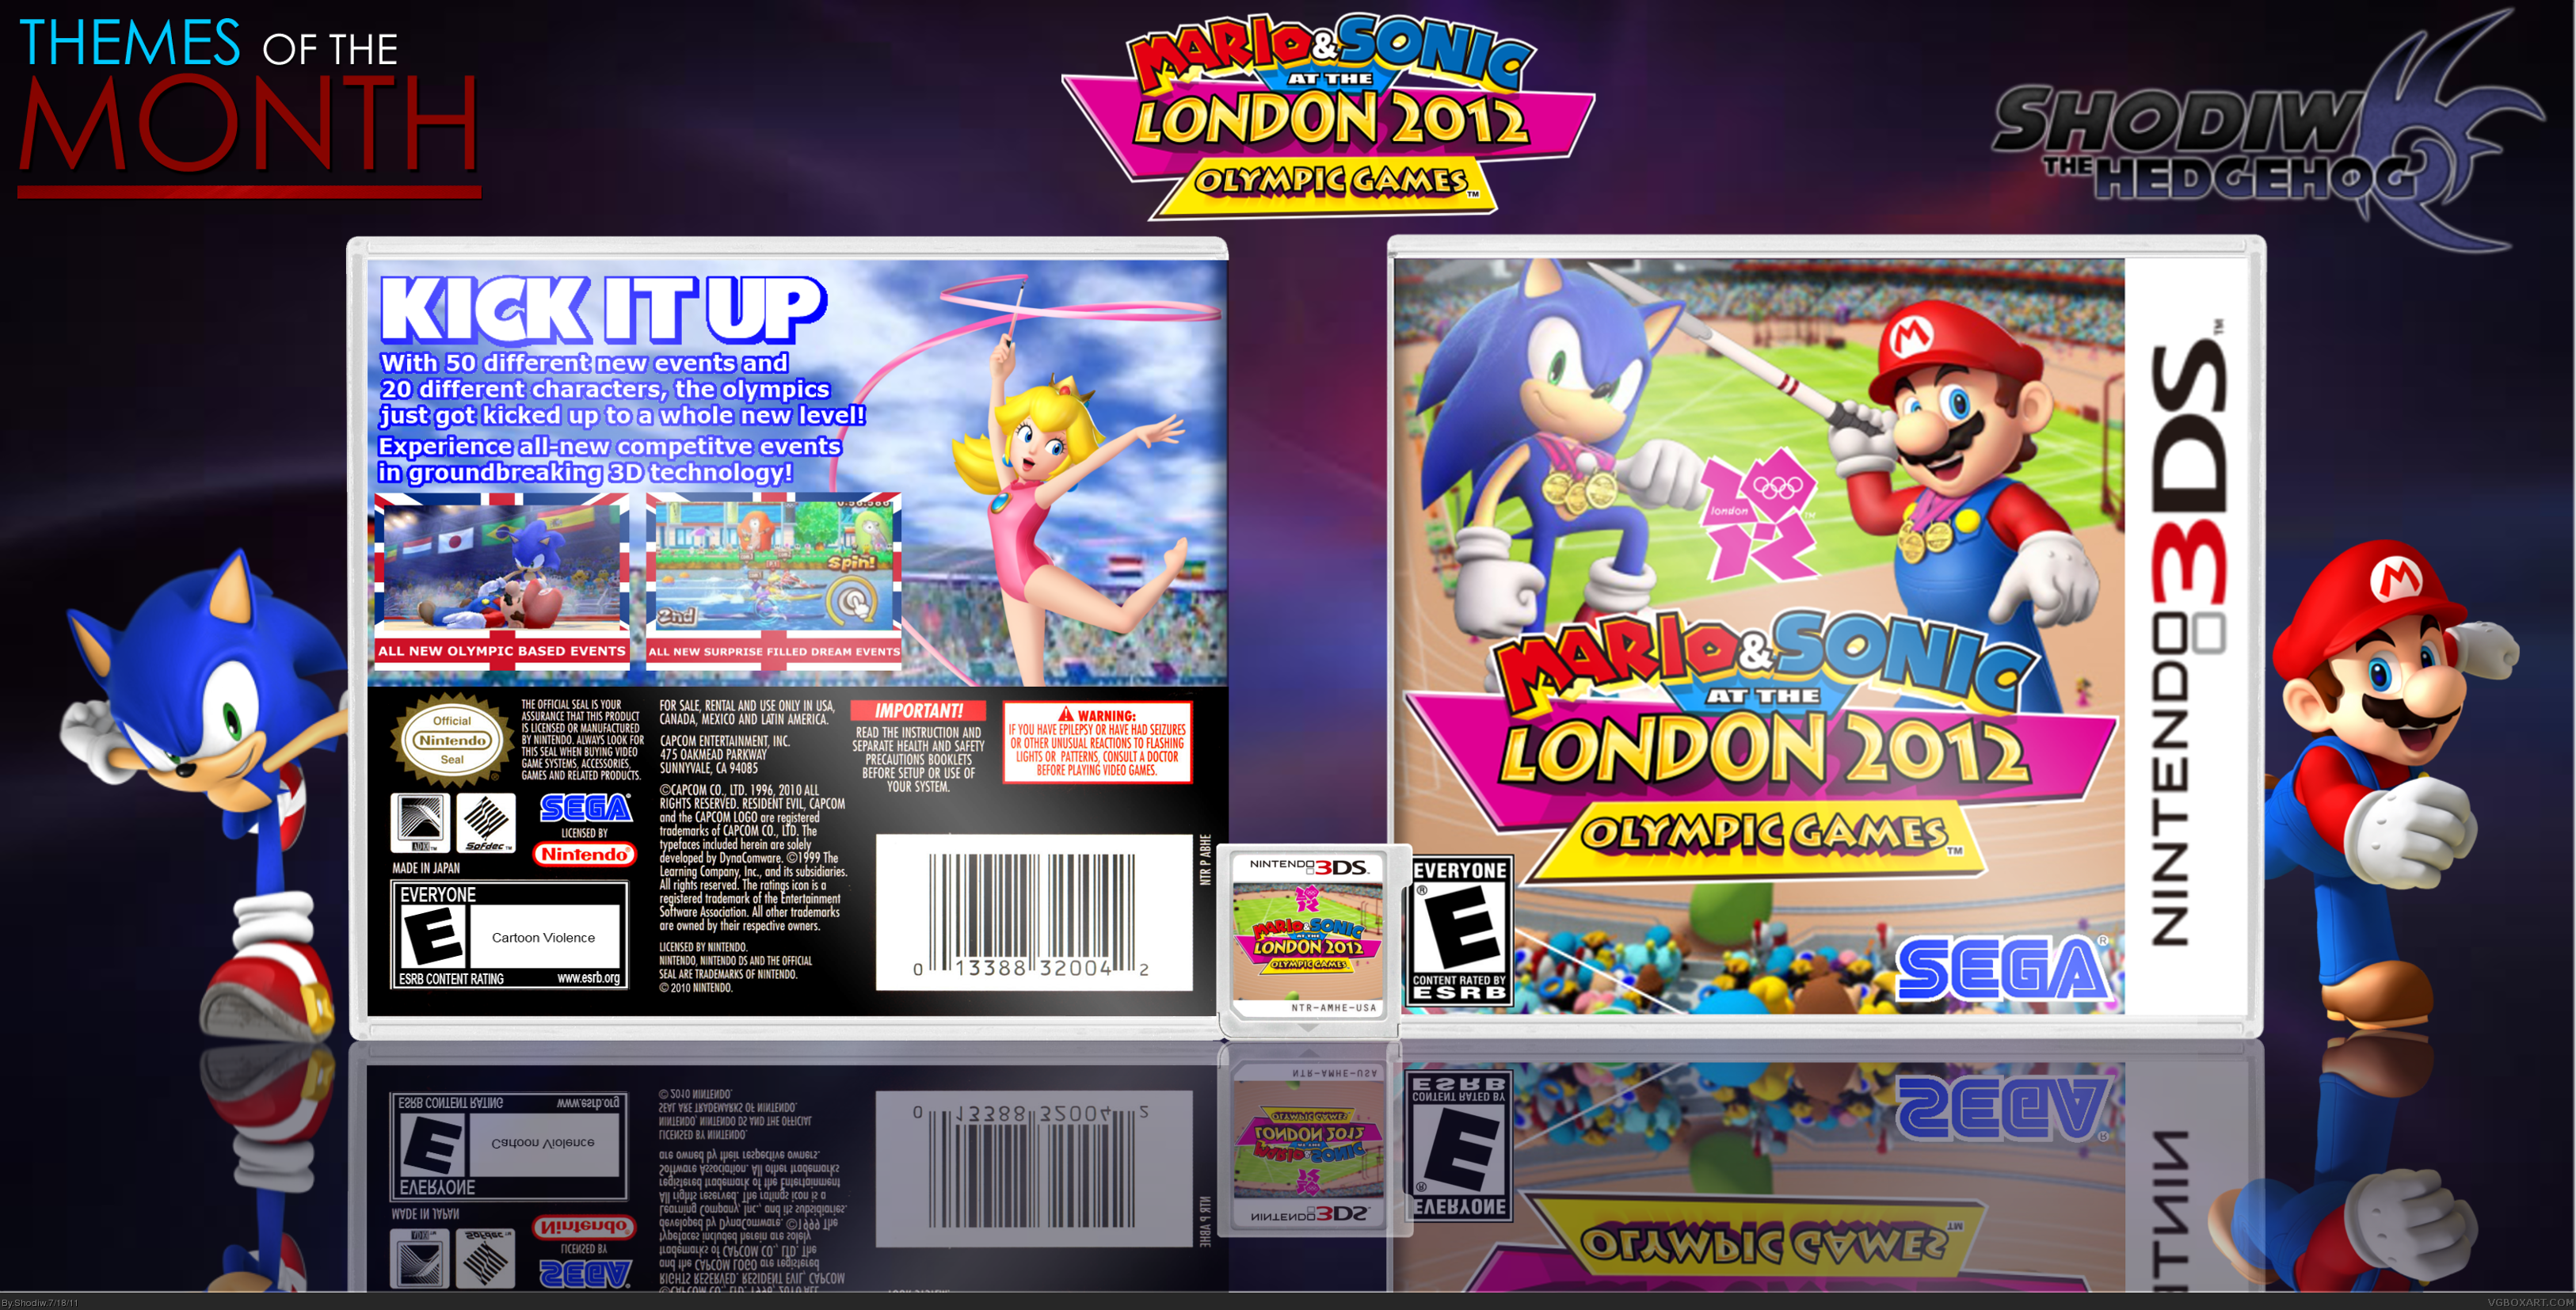 Mario & Sonic at the London 2012 Olympic Games box cover